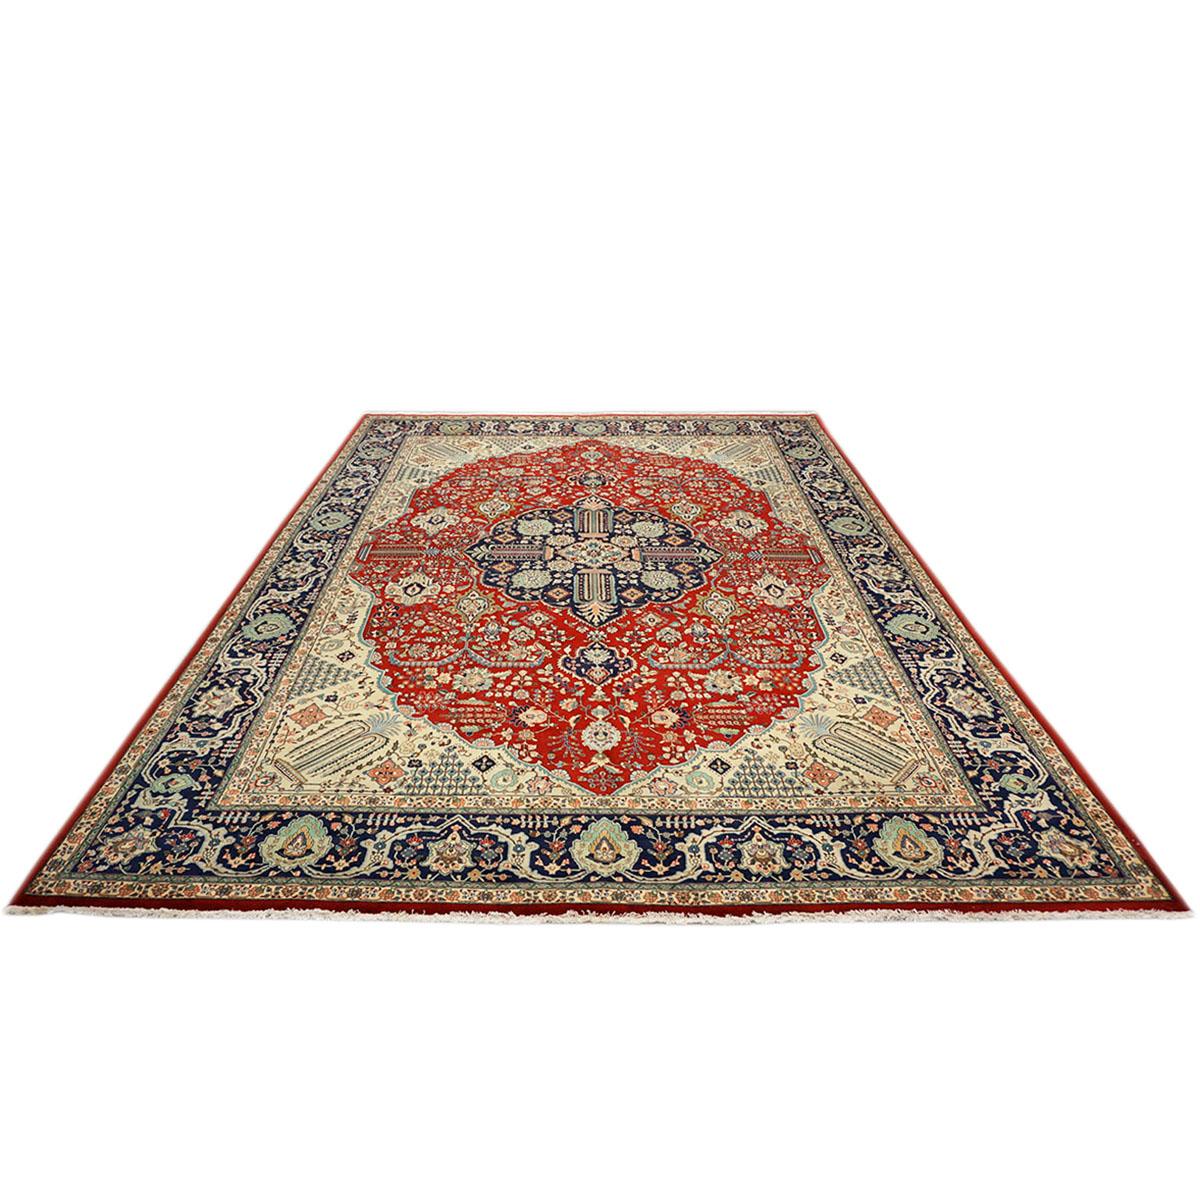 Ashly Fine Rugs presents a 1930s antique Persian Tabriz. Tabriz is a northern city in modern-day Iran and has forever been famous for the fineness and craftsmanship of its handmade rugs. This piece has a light ivory-colored background with a large